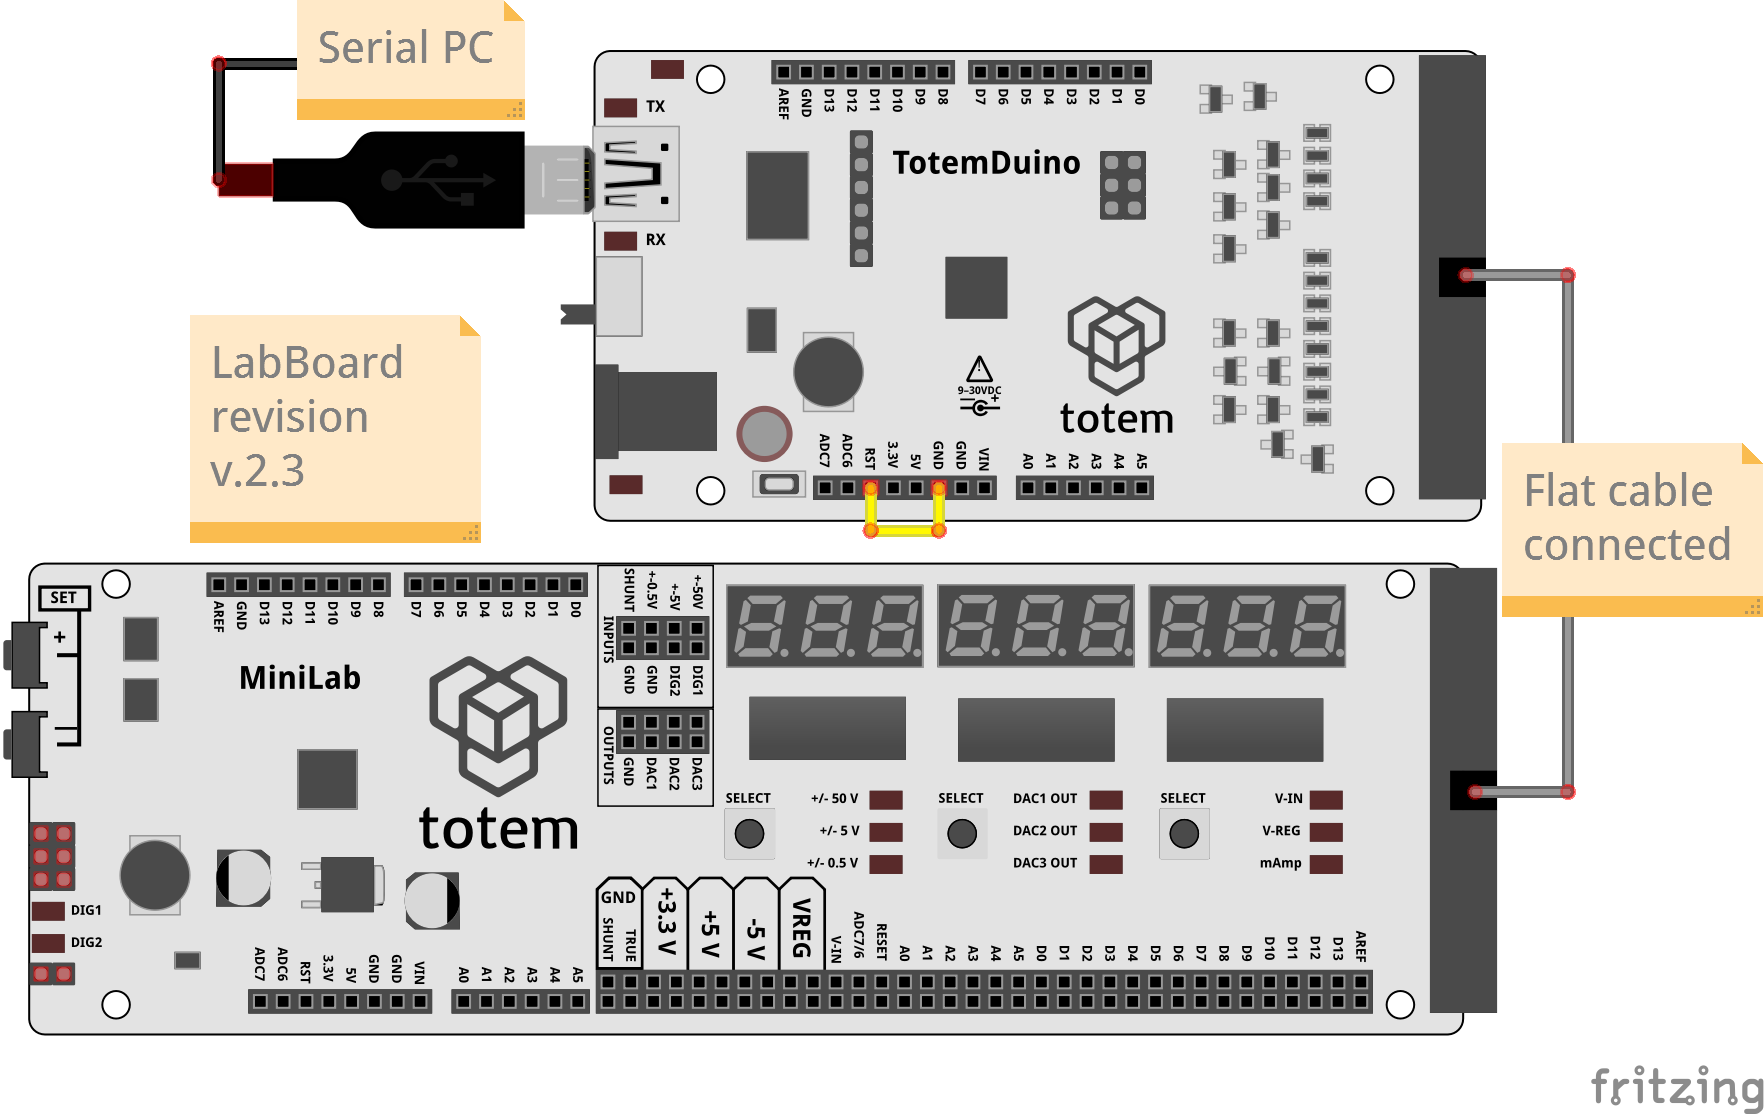 LabBoard serial with other boards